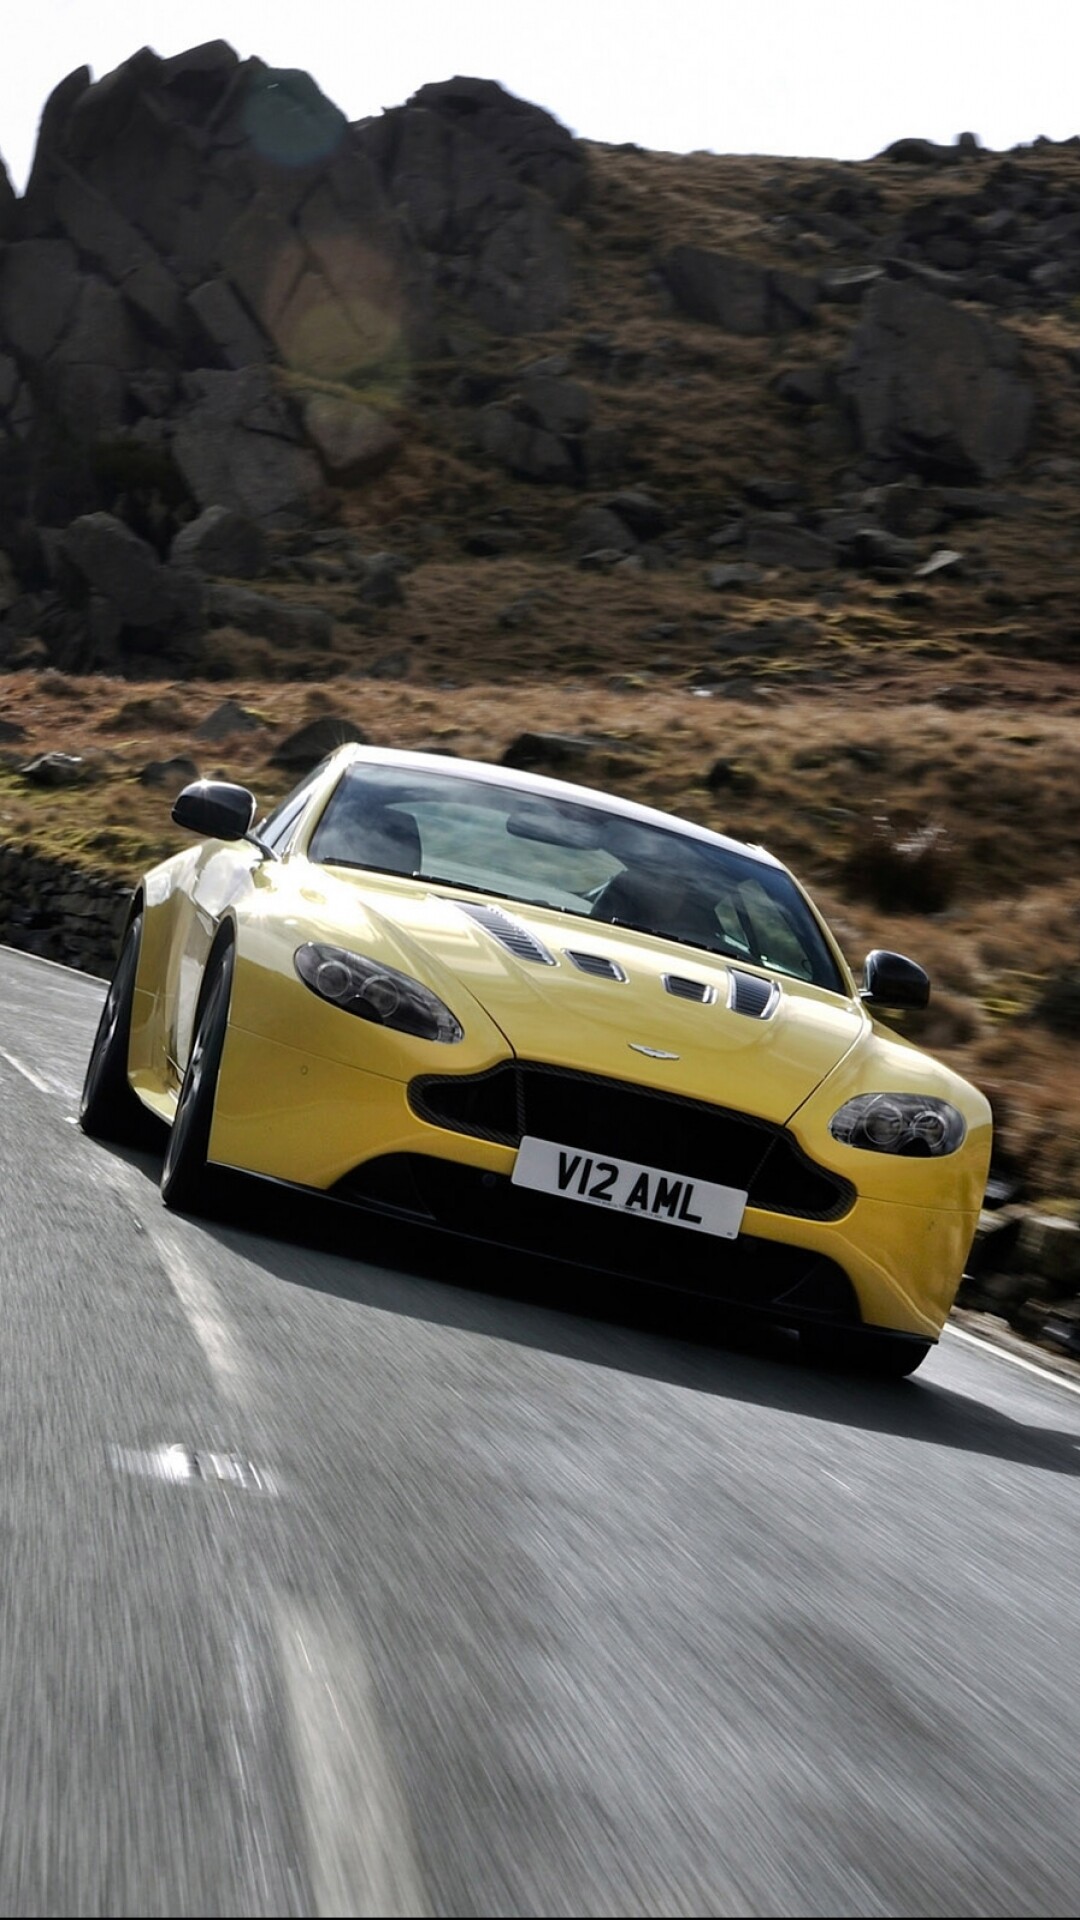 Aston Martin: V12 Vantage, Production limited to 249 examples globally. 1080x1920 Full HD Background.